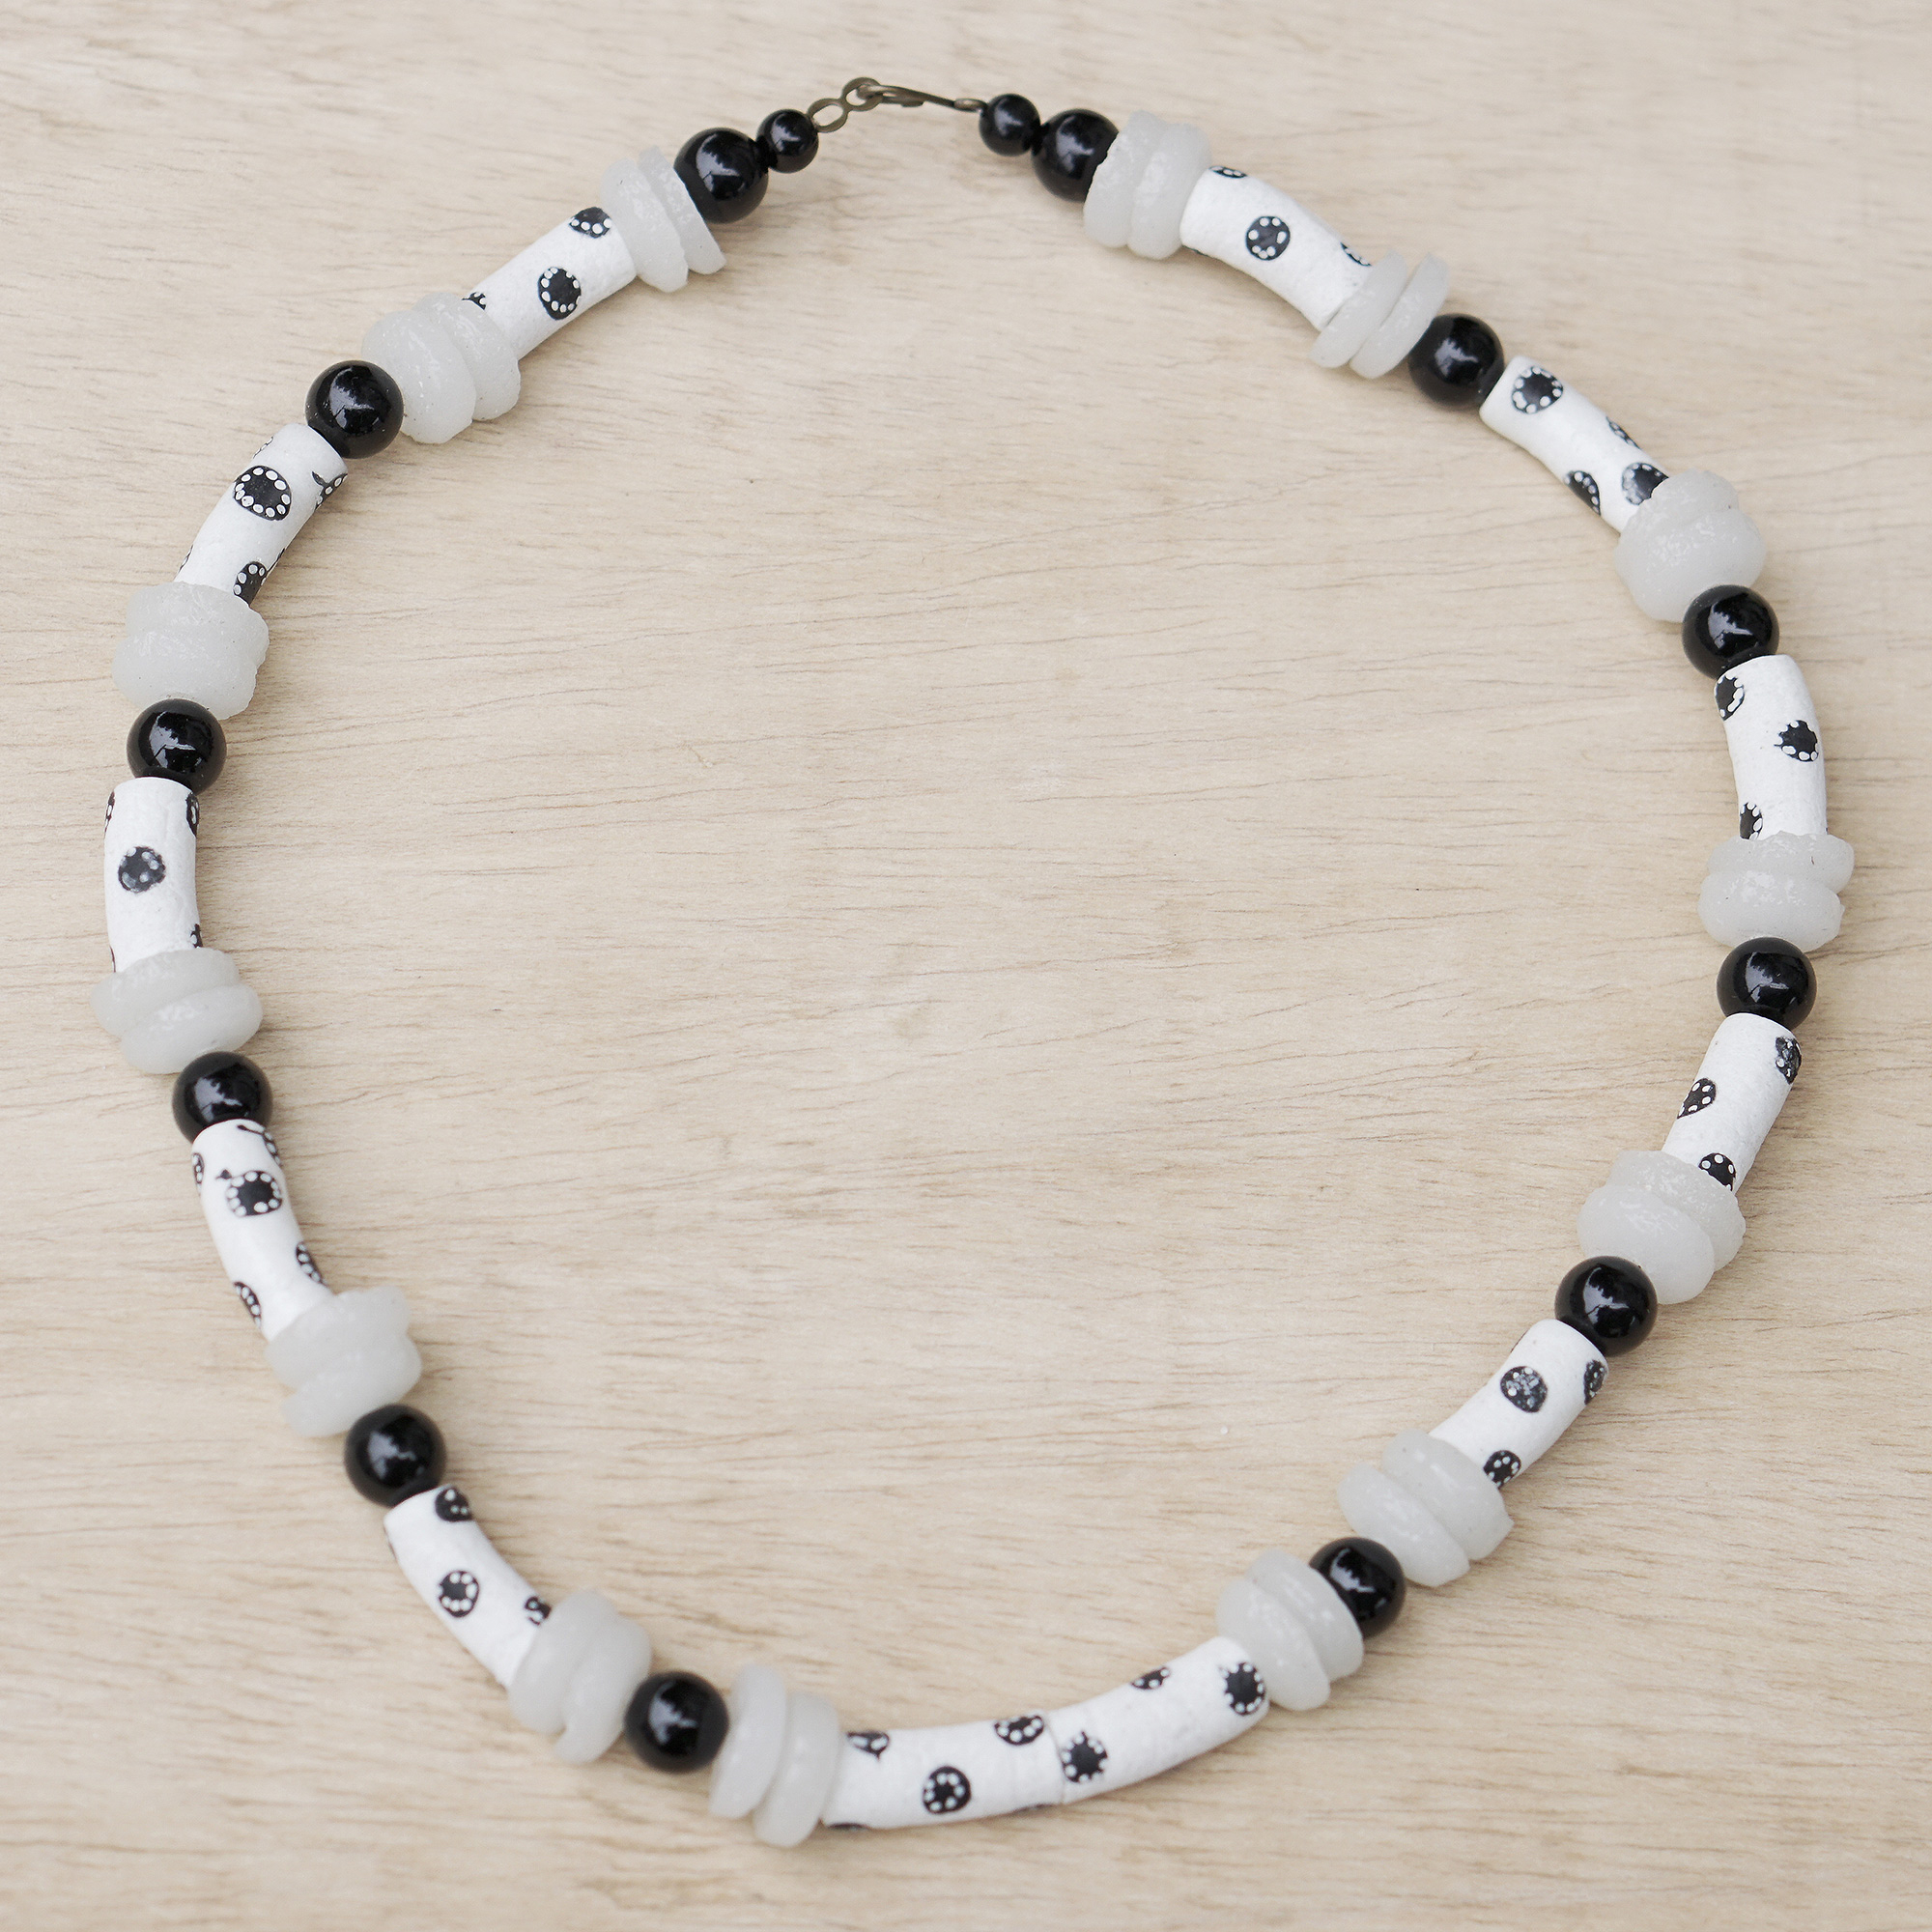 Buy Choker Necklace Black White Pearl Seed Bead Online in India - Etsy